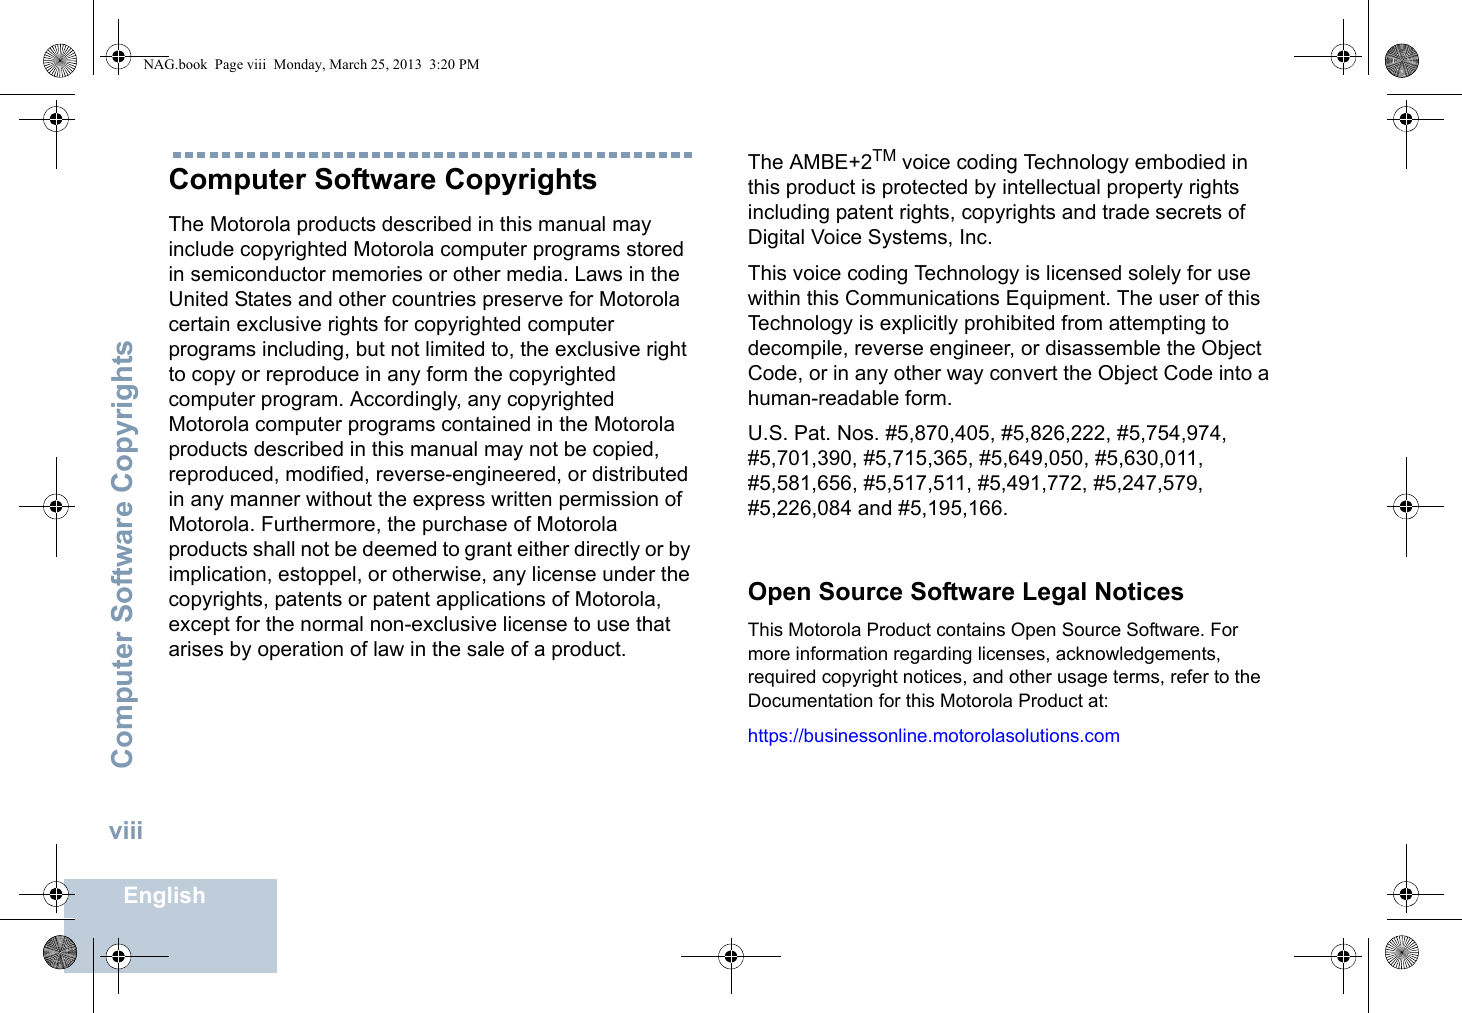 Computer Software CopyrightsEnglishviiiComputer Software CopyrightsThe Motorola products described in this manual may include copyrighted Motorola computer programs stored in semiconductor memories or other media. Laws in the United States and other countries preserve for Motorola certain exclusive rights for copyrighted computer programs including, but not limited to, the exclusive right to copy or reproduce in any form the copyrighted computer program. Accordingly, any copyrighted Motorola computer programs contained in the Motorola products described in this manual may not be copied, reproduced, modified, reverse-engineered, or distributed in any manner without the express written permission of Motorola. Furthermore, the purchase of Motorola products shall not be deemed to grant either directly or by implication, estoppel, or otherwise, any license under the copyrights, patents or patent applications of Motorola, except for the normal non-exclusive license to use that arises by operation of law in the sale of a product.The AMBE+2TM voice coding Technology embodied in this product is protected by intellectual property rights including patent rights, copyrights and trade secrets of Digital Voice Systems, Inc. This voice coding Technology is licensed solely for use within this Communications Equipment. The user of this Technology is explicitly prohibited from attempting to decompile, reverse engineer, or disassemble the Object Code, or in any other way convert the Object Code into a human-readable form. U.S. Pat. Nos. #5,870,405, #5,826,222, #5,754,974, #5,701,390, #5,715,365, #5,649,050, #5,630,011, #5,581,656, #5,517,511, #5,491,772, #5,247,579, #5,226,084 and #5,195,166.Open Source Software Legal NoticesThis Motorola Product contains Open Source Software. For more information regarding licenses, acknowledgements, required copyright notices, and other usage terms, refer to the Documentation for this Motorola Product at: https://businessonline.motorolasolutions.com   NAG.book  Page viii  Monday, March 25, 2013  3:20 PM